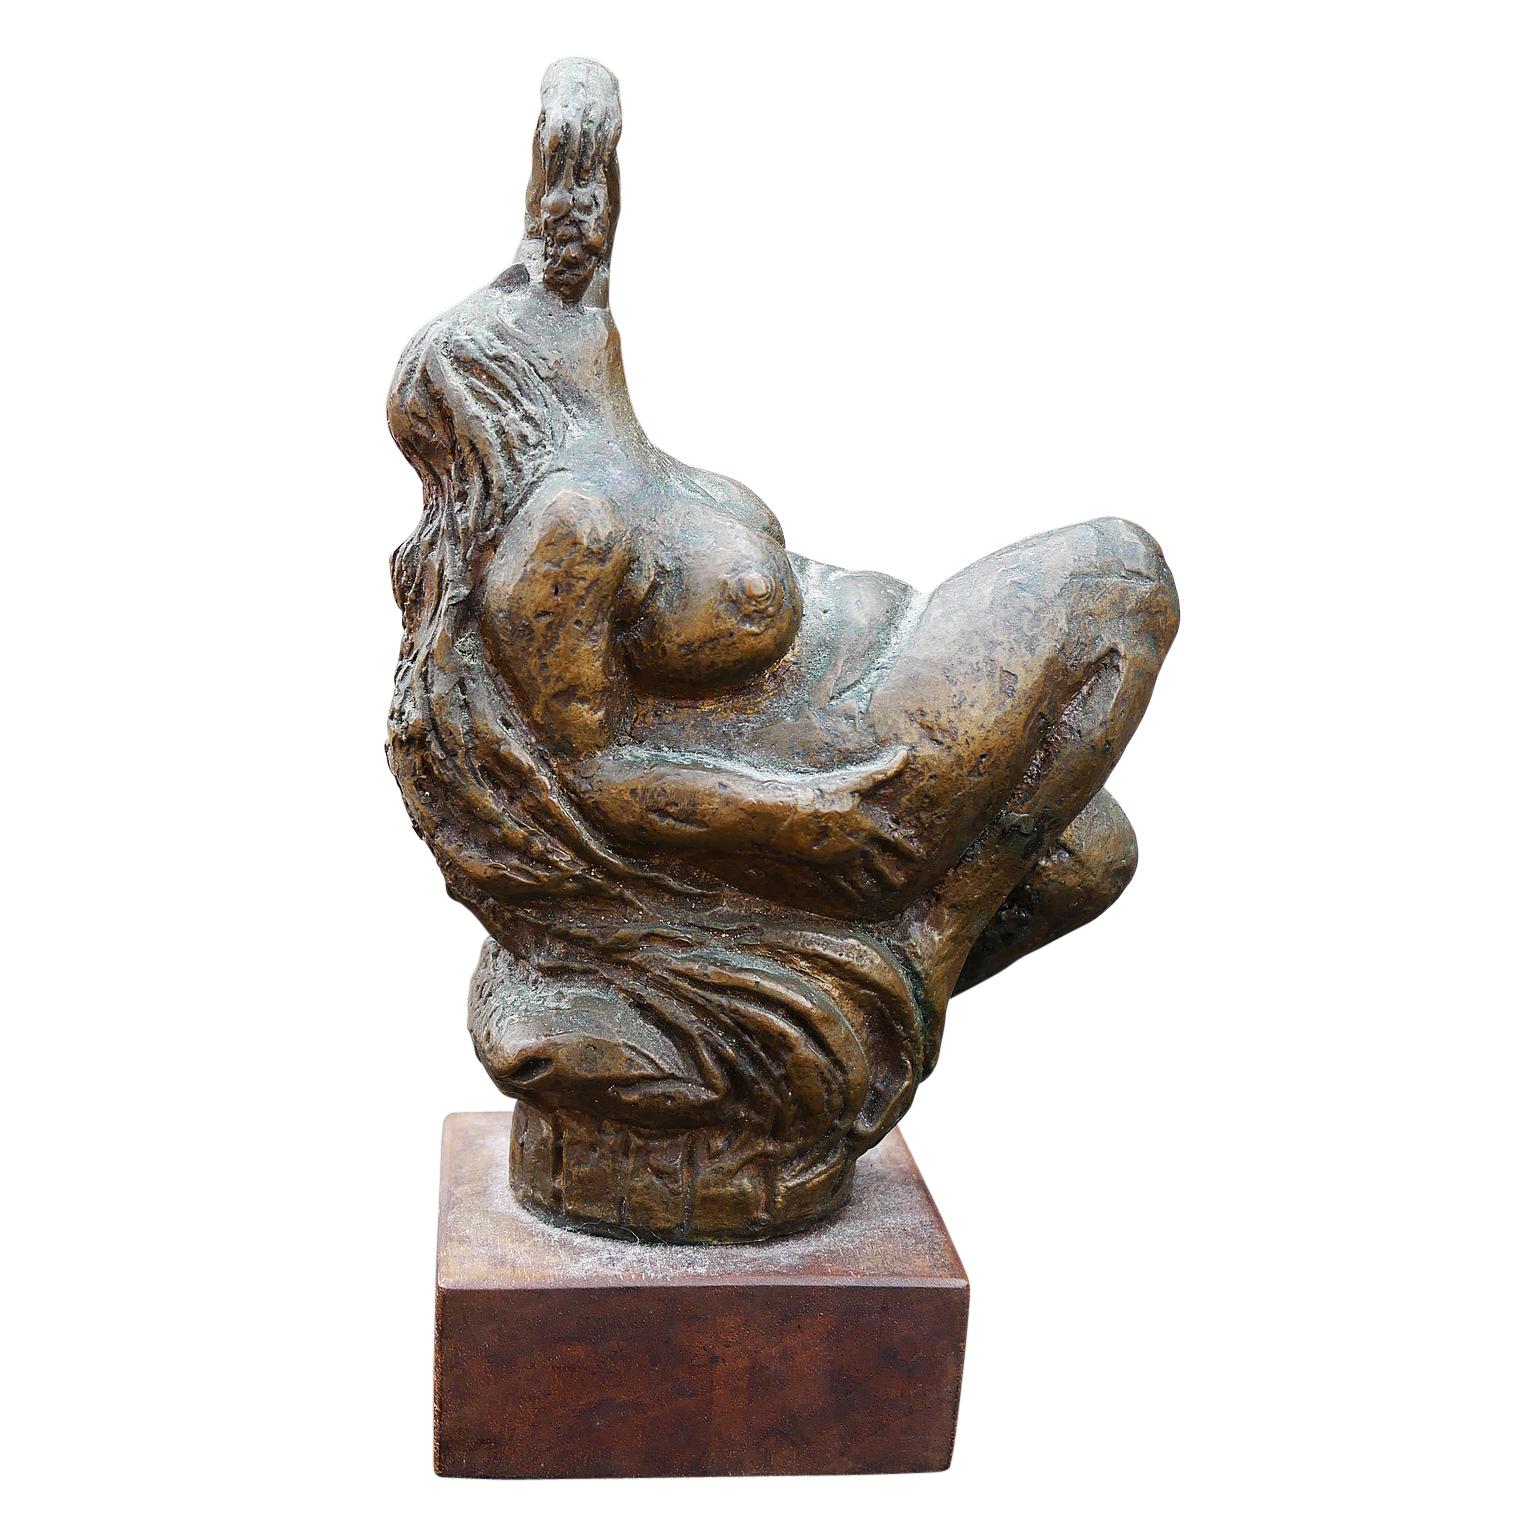 James Kearns Figurative Sculpture - Modern Abstract Figurative Bronze Sculpture of Reclining Nude Female with Grapes